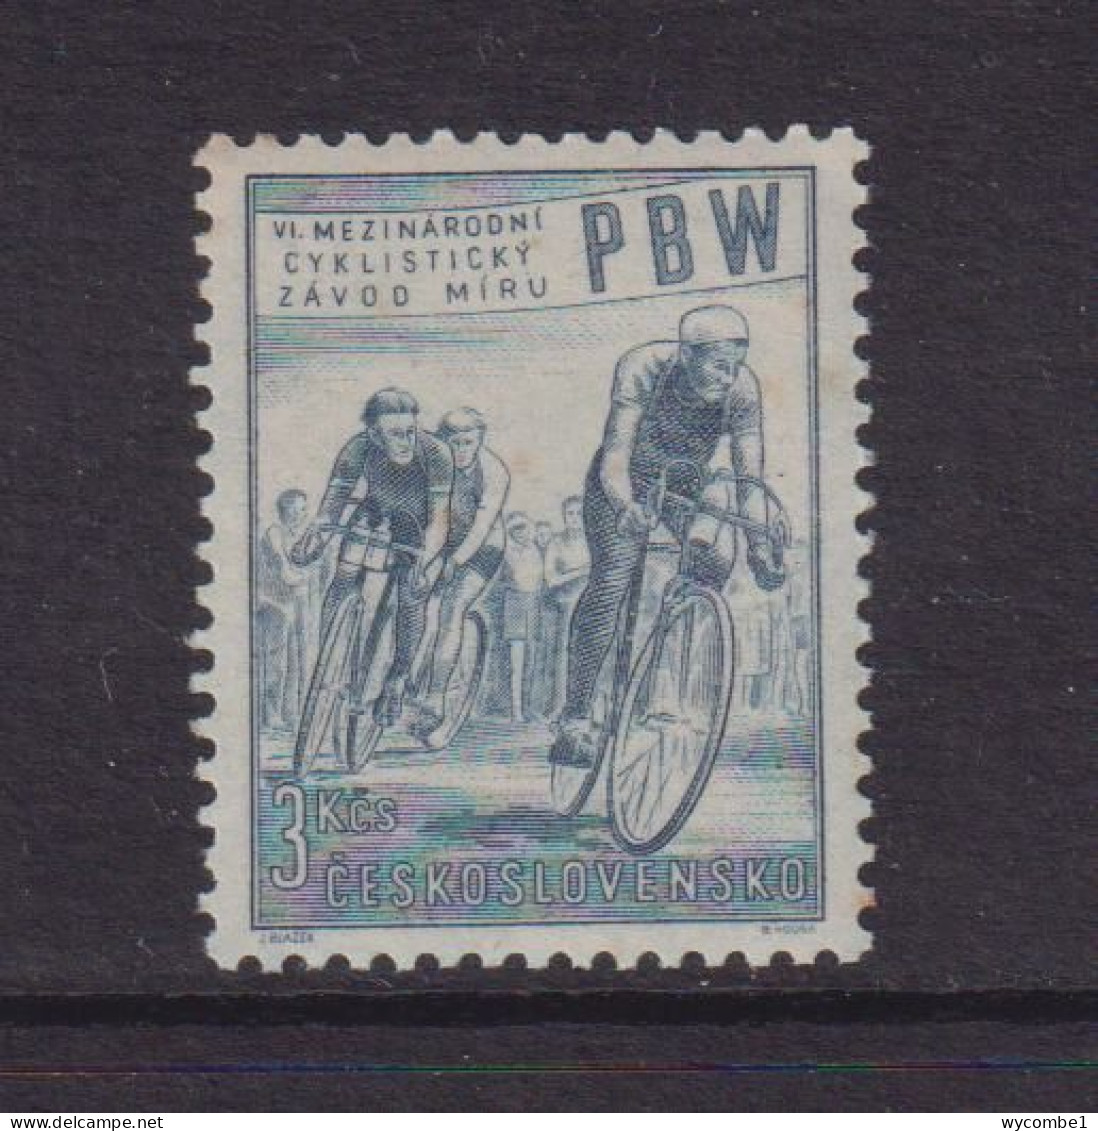 CZECHOSLOVAKIA  - 1953  Cycle Race  3k  Never Hinged Mint - Unused Stamps